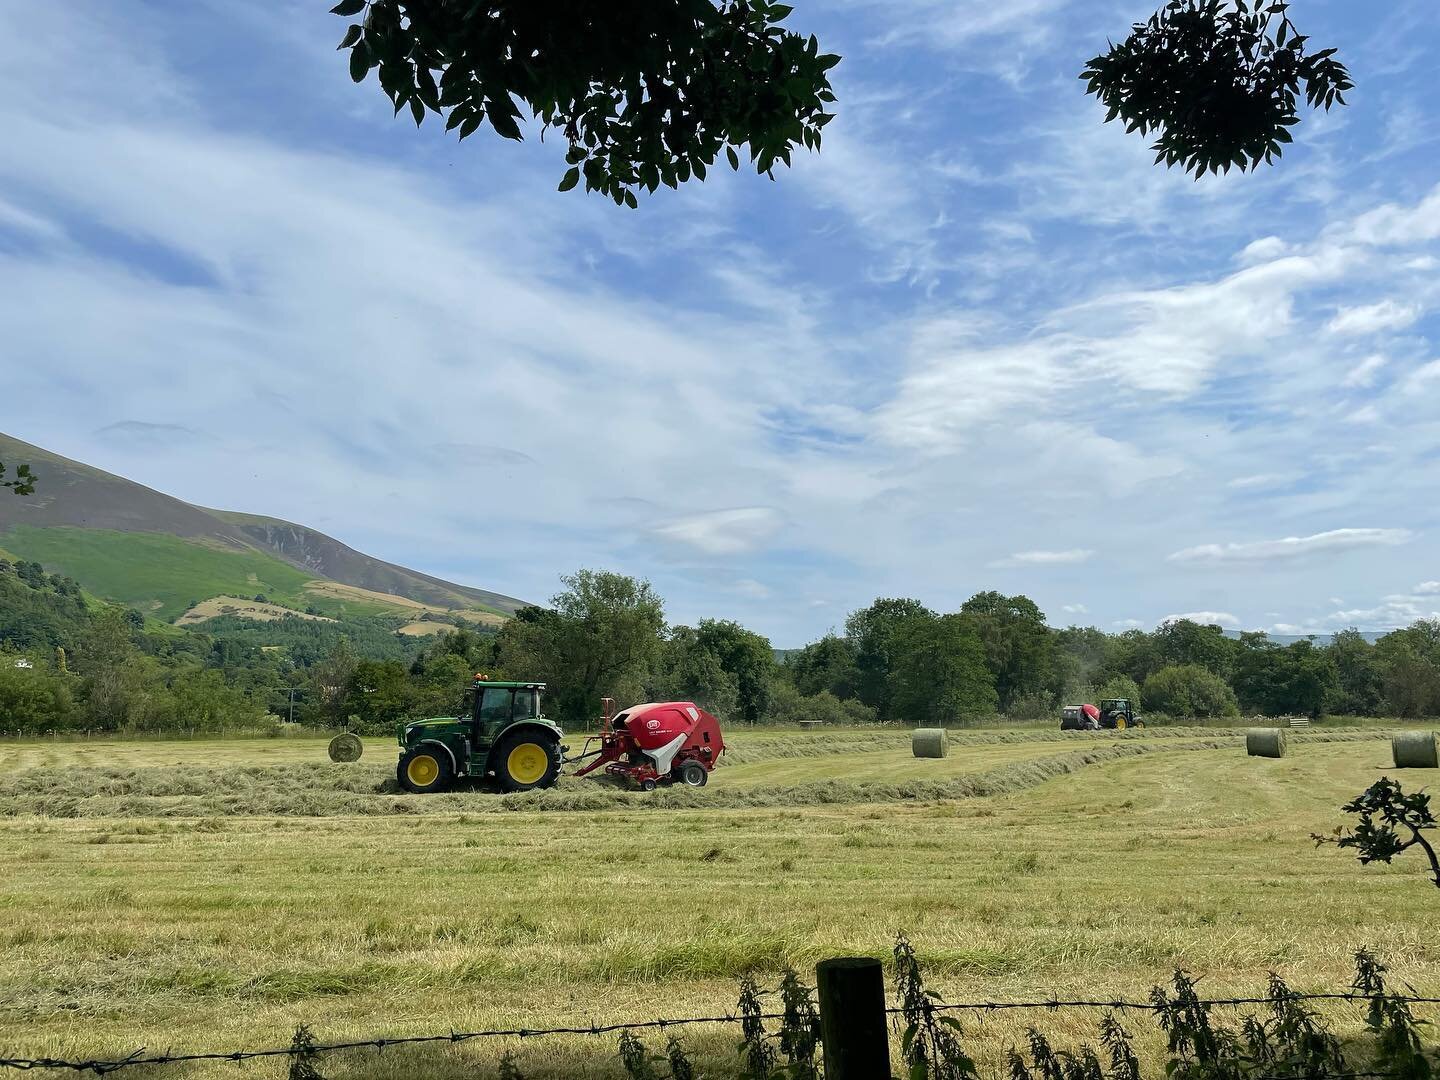 We are seeing double today - we have 36 acres of grass down baking in the sun ☀️ #derwentflock #silagetime #farmers #farmlife #farming #farm #farmersoftheuk #british_agri #ig_countryside #agriculture #livestock #localproduce #lakedistrict #keswick #c